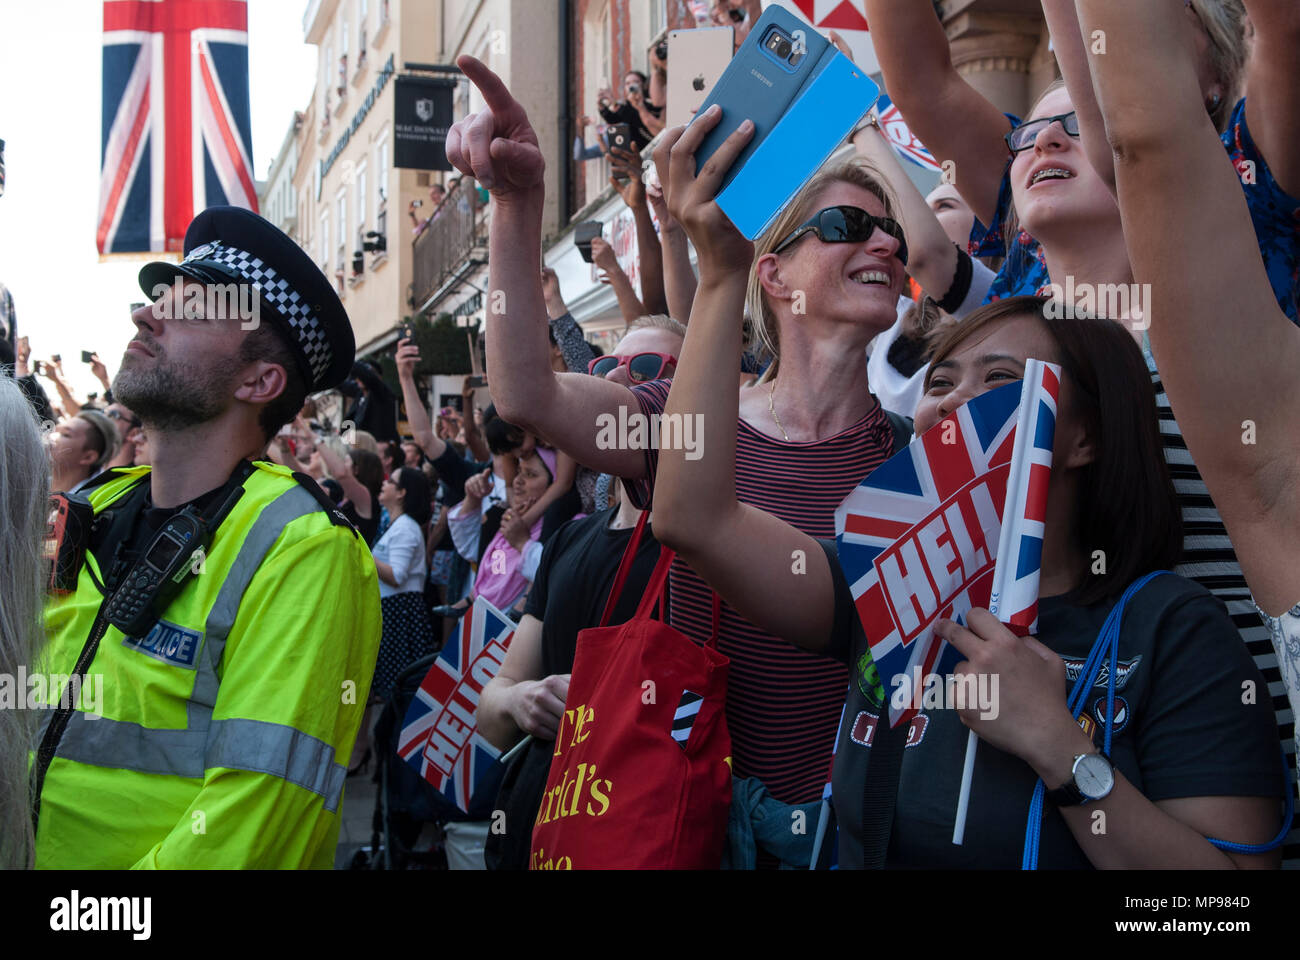 Duke and Duchess of Sussex royal wedding. People in crowd with mobile devises phones iphones i phone tourists watching  to take photo of Prince Harry Meghan Markle  procession  Windsor Uk 2018 HOMER SYKES Stock Photo